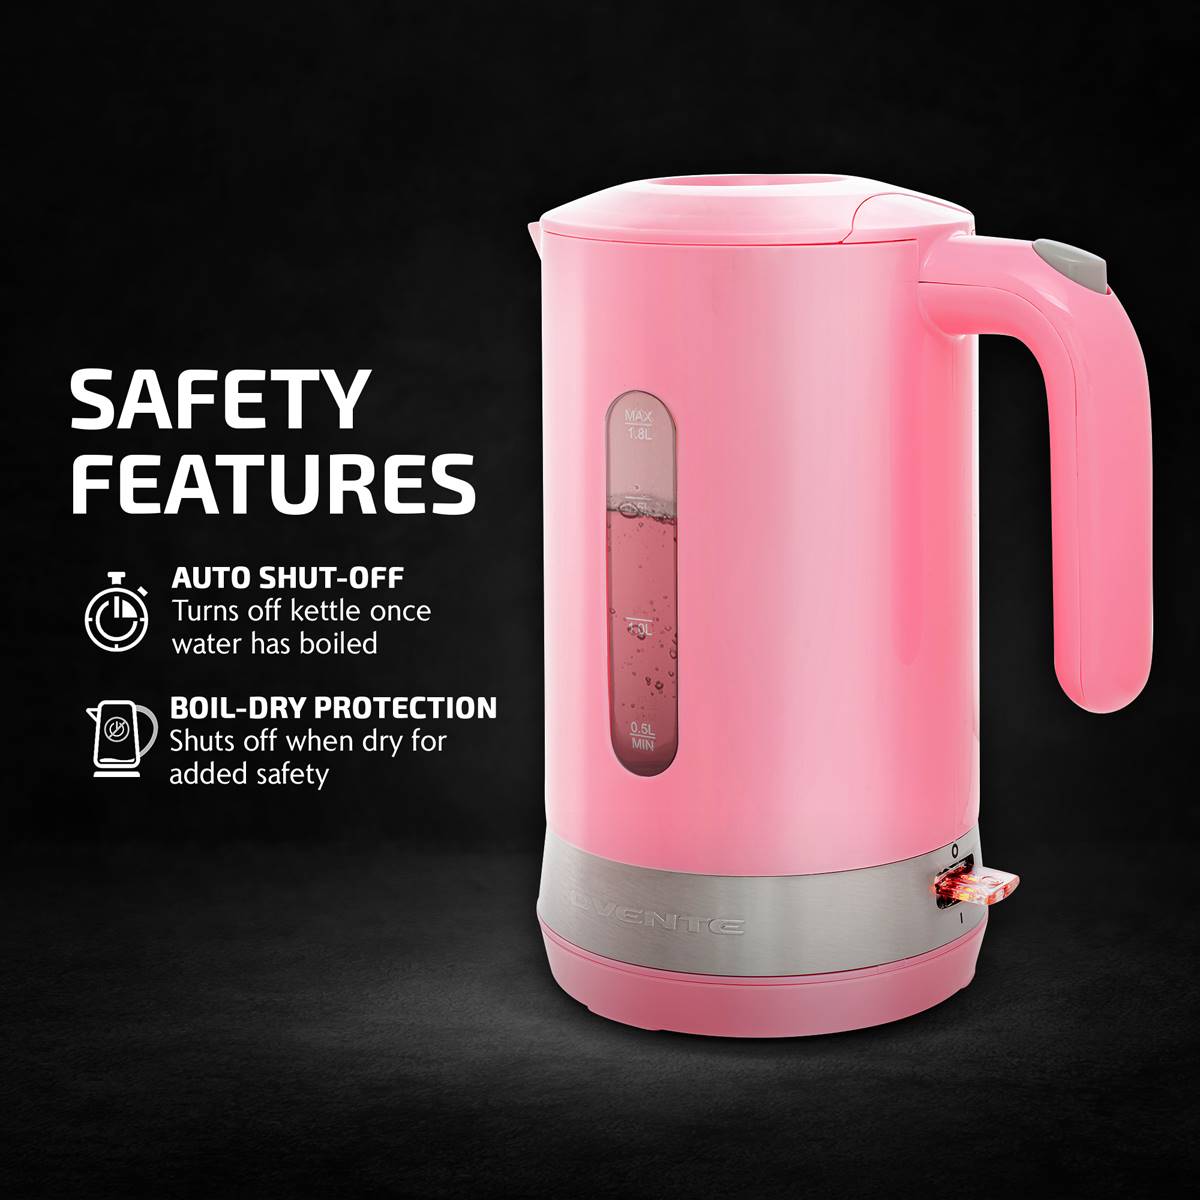 Ovente 1.8 Liter Electric Kettle W/ ProntoFill(tm) Lid - Pink